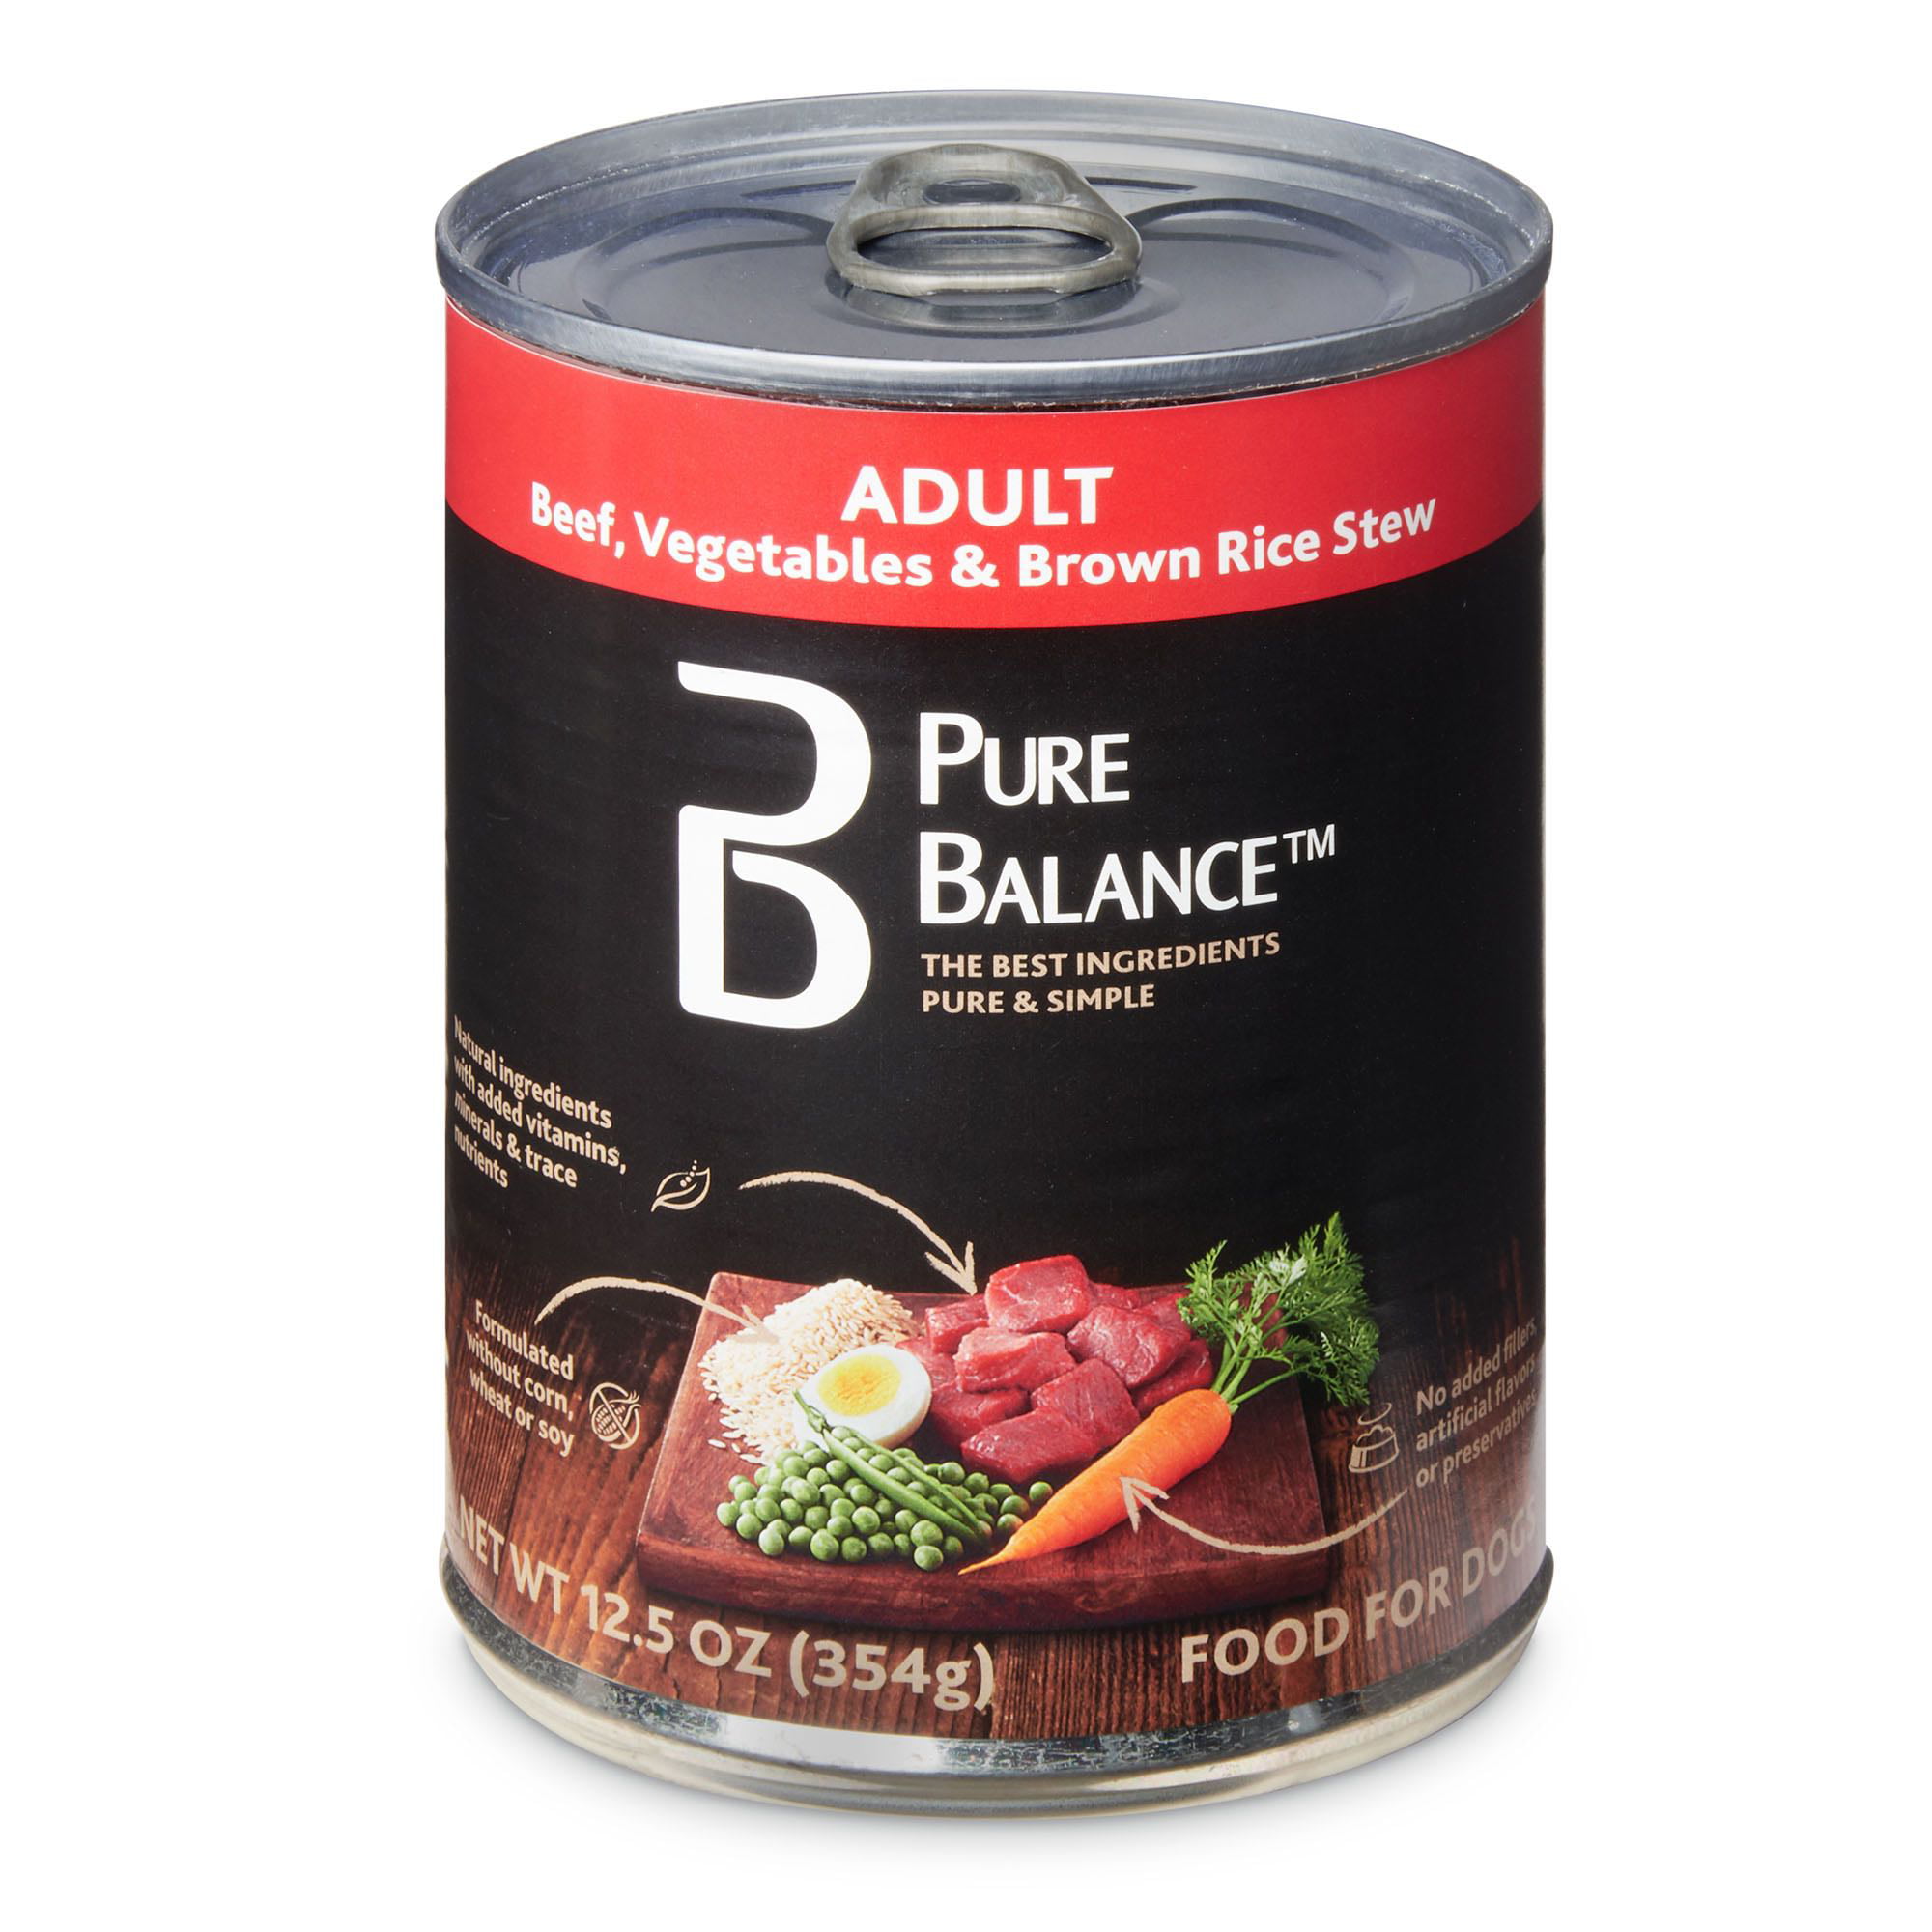 Pure Balance Beef, Vegetables & Brown Rice Stew Adult Wet